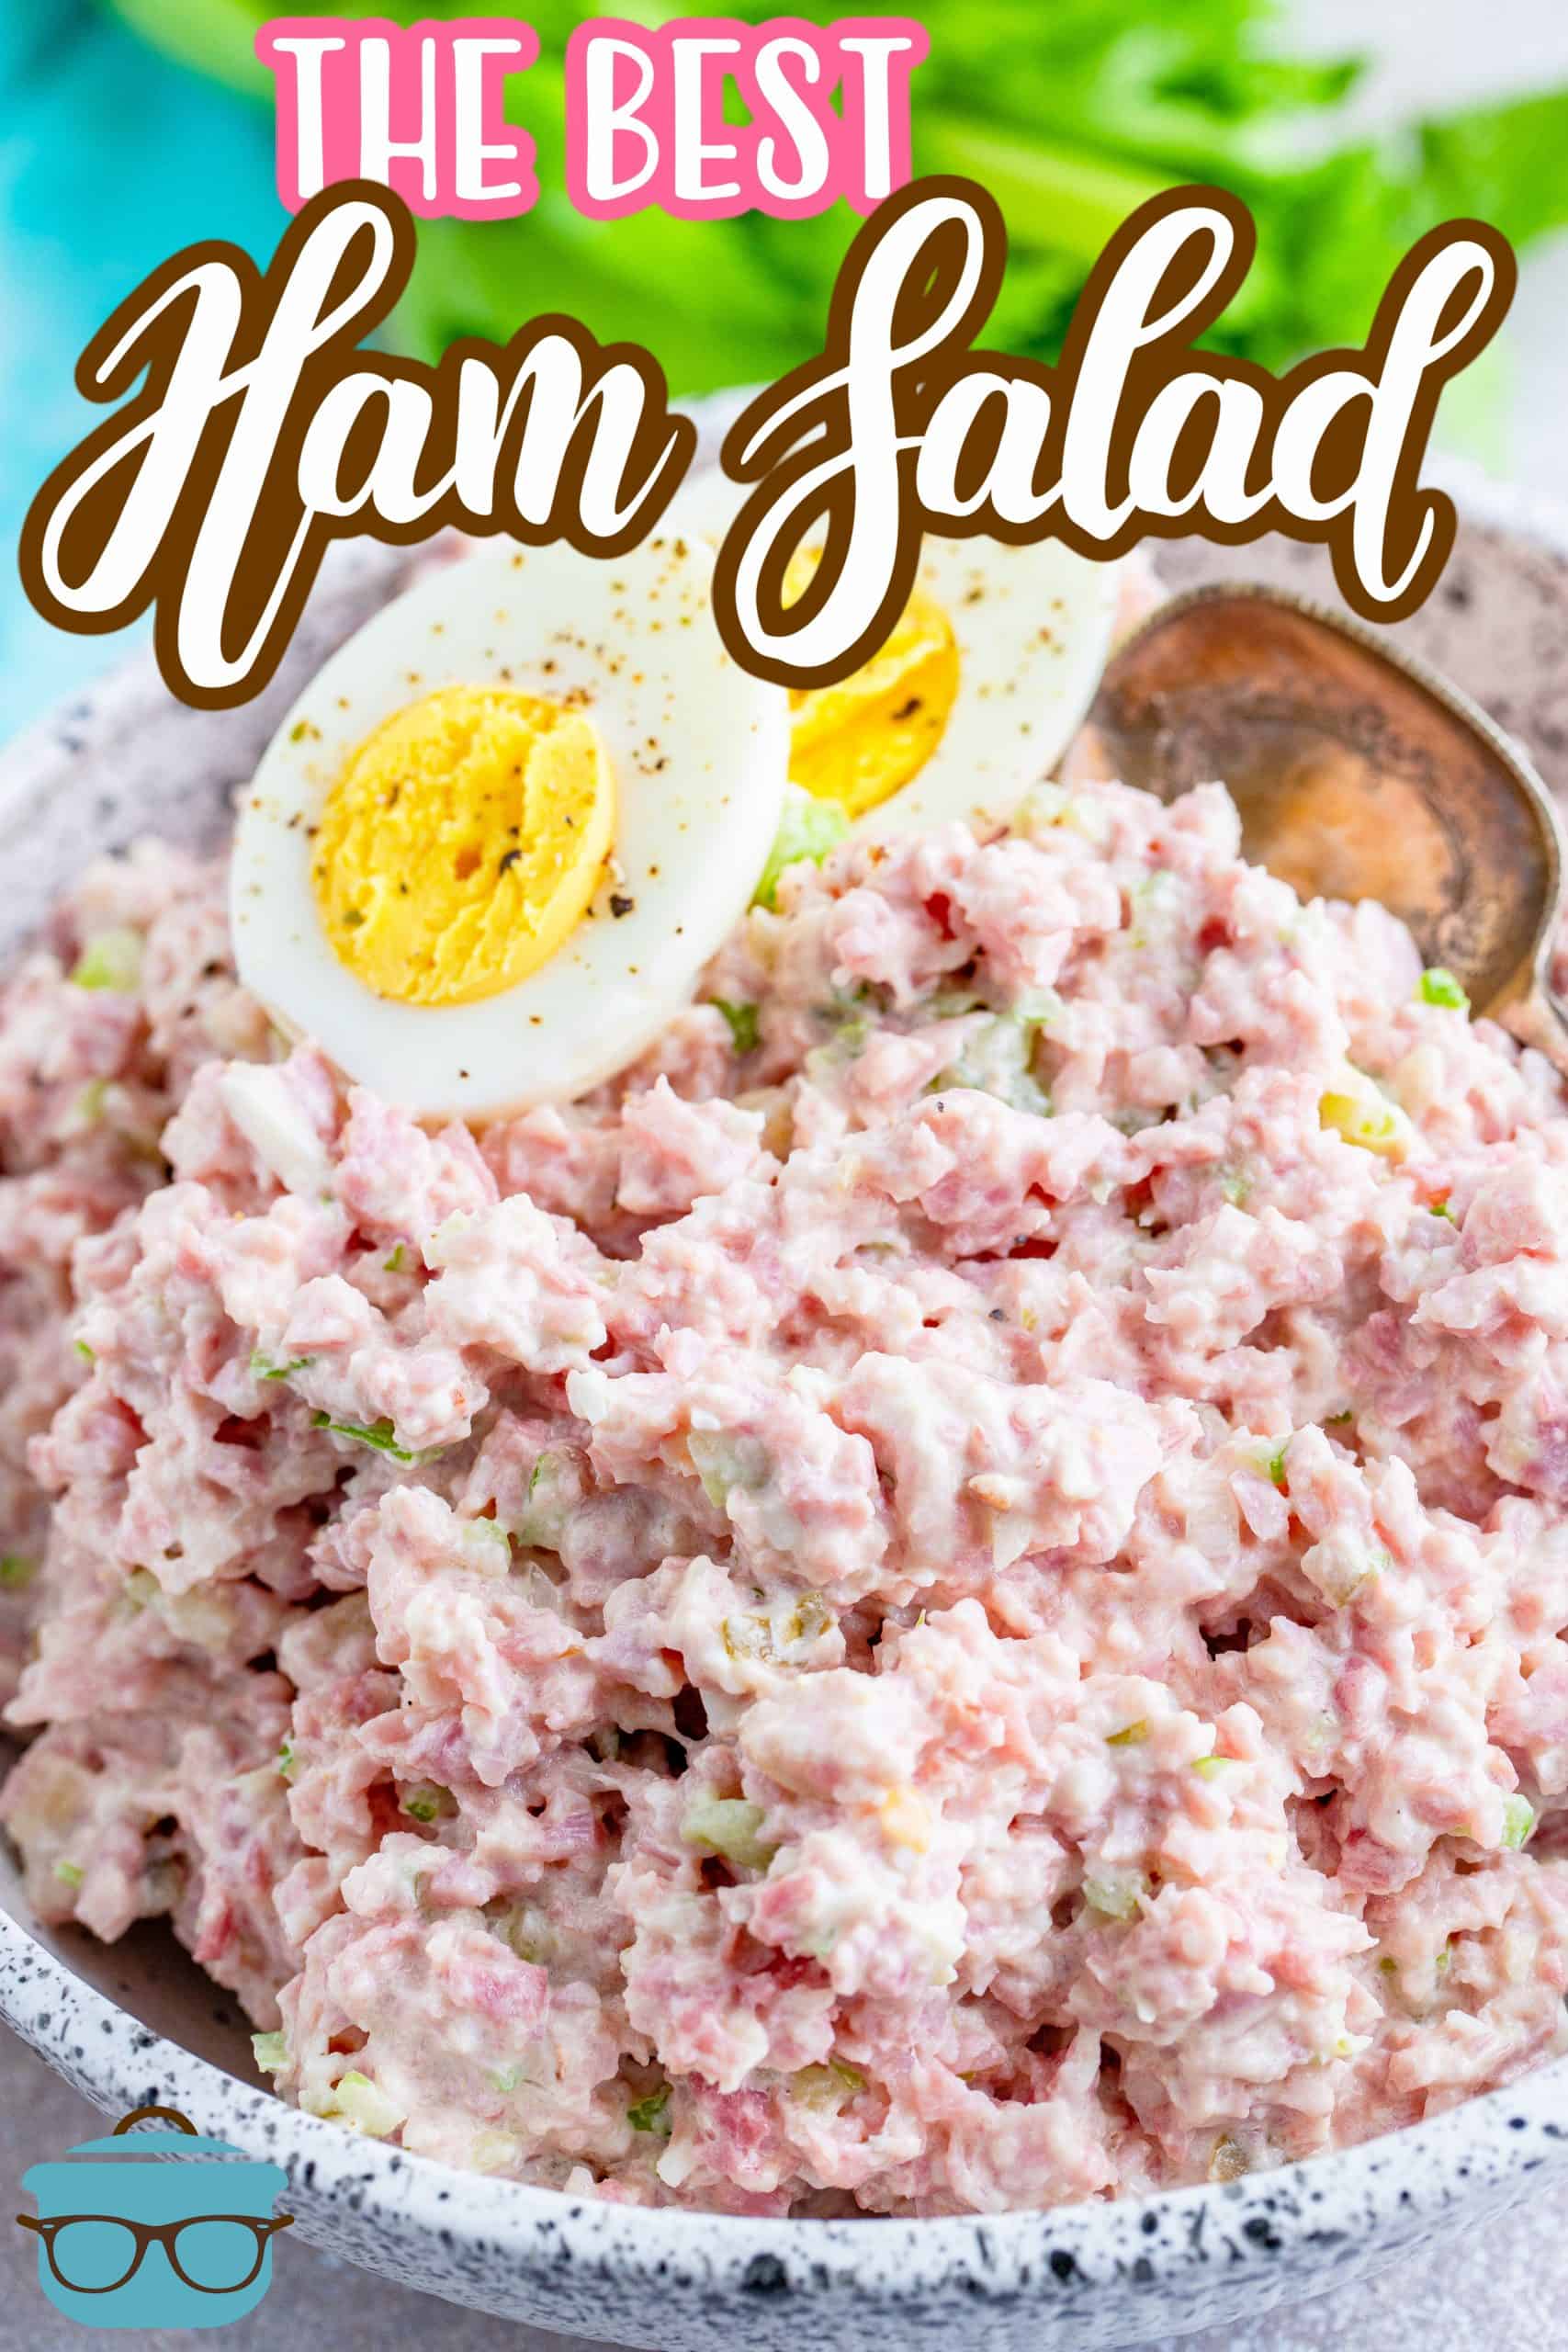 The Best Ham Salad recipe from The Country Cook, ham salad shown in a bowl with a sliced hardboiled egg on top